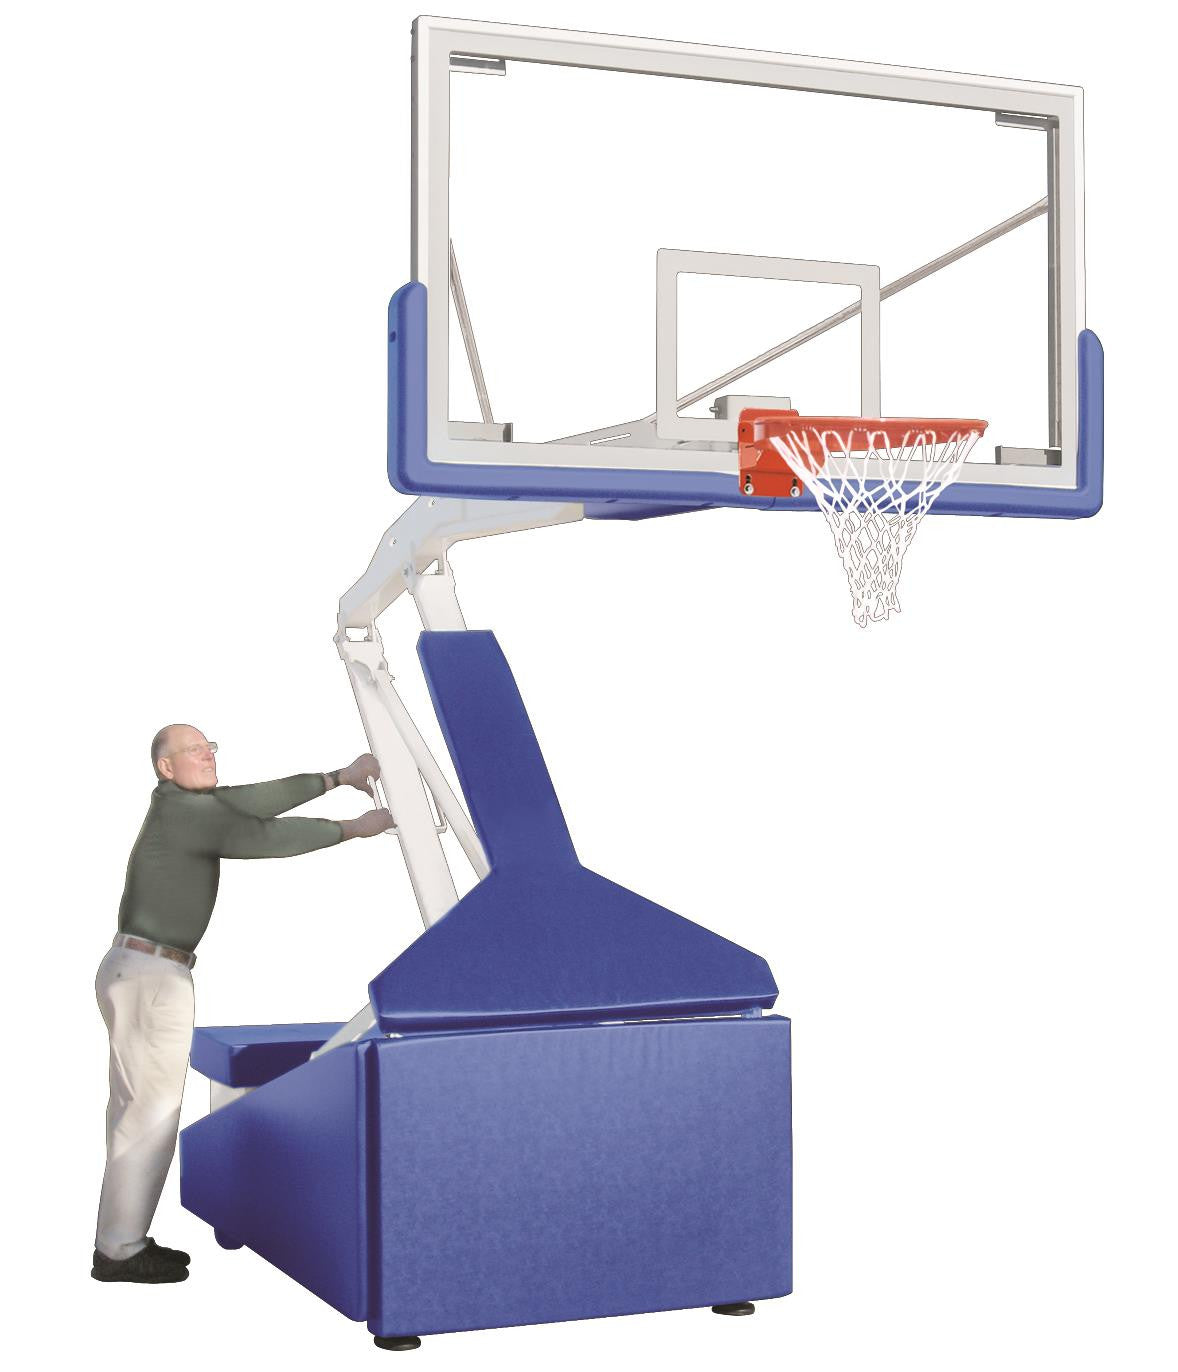 First-Team-Hurricane-Triumph-FL-Indoor-Portable-Basketball-System-Lowered